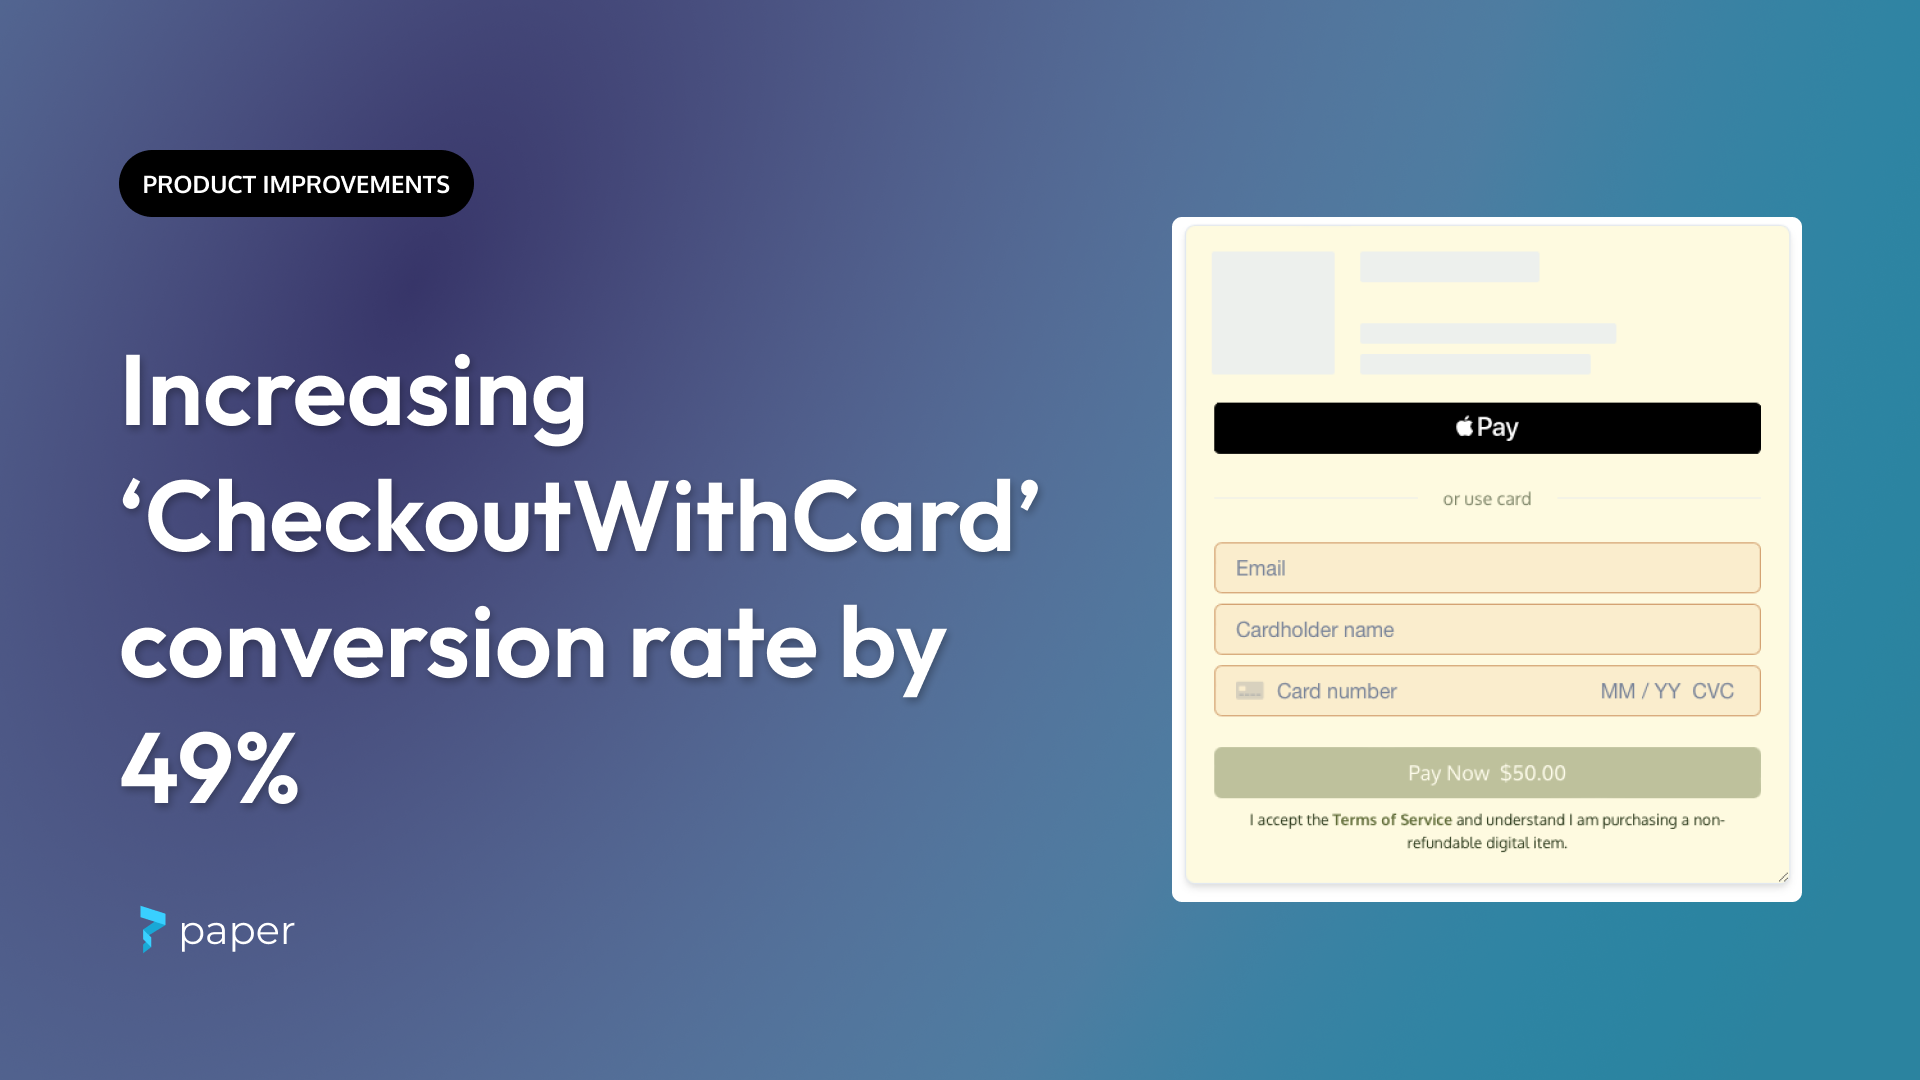 Upcoming UX Improvements to CheckoutWithCard